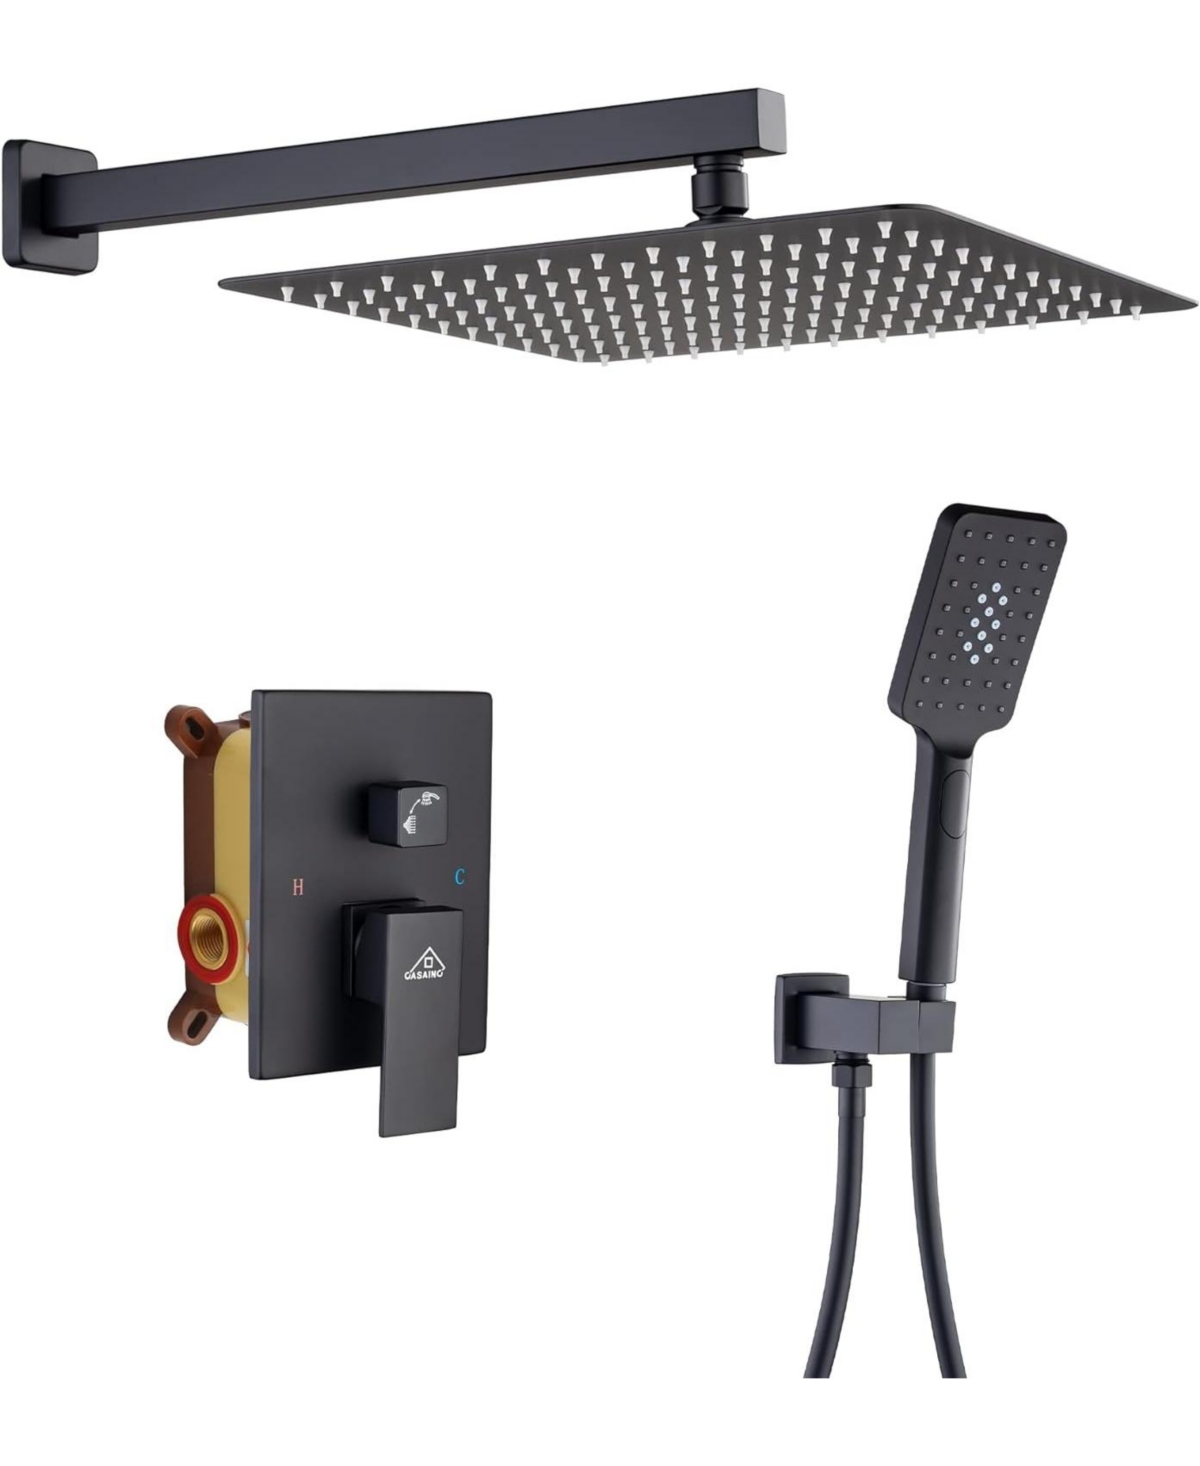 12" Inch Wall Mounted Square Shower System Set with Handheld Spray - Black